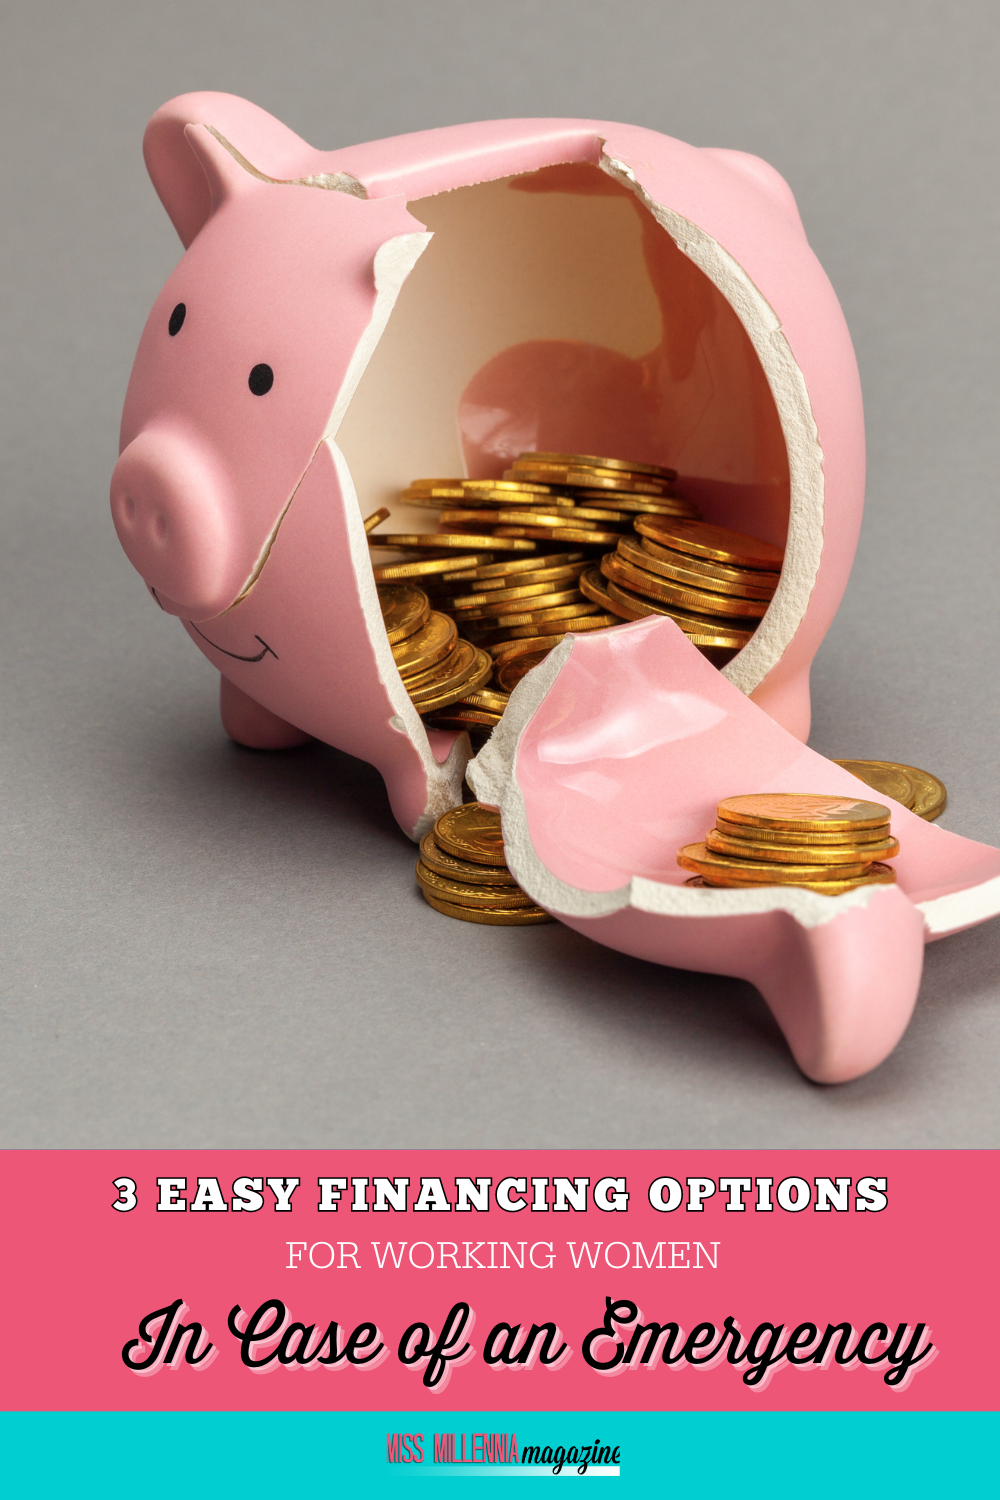 3 Easy Financing Options for Working Women In Case of an Emergency